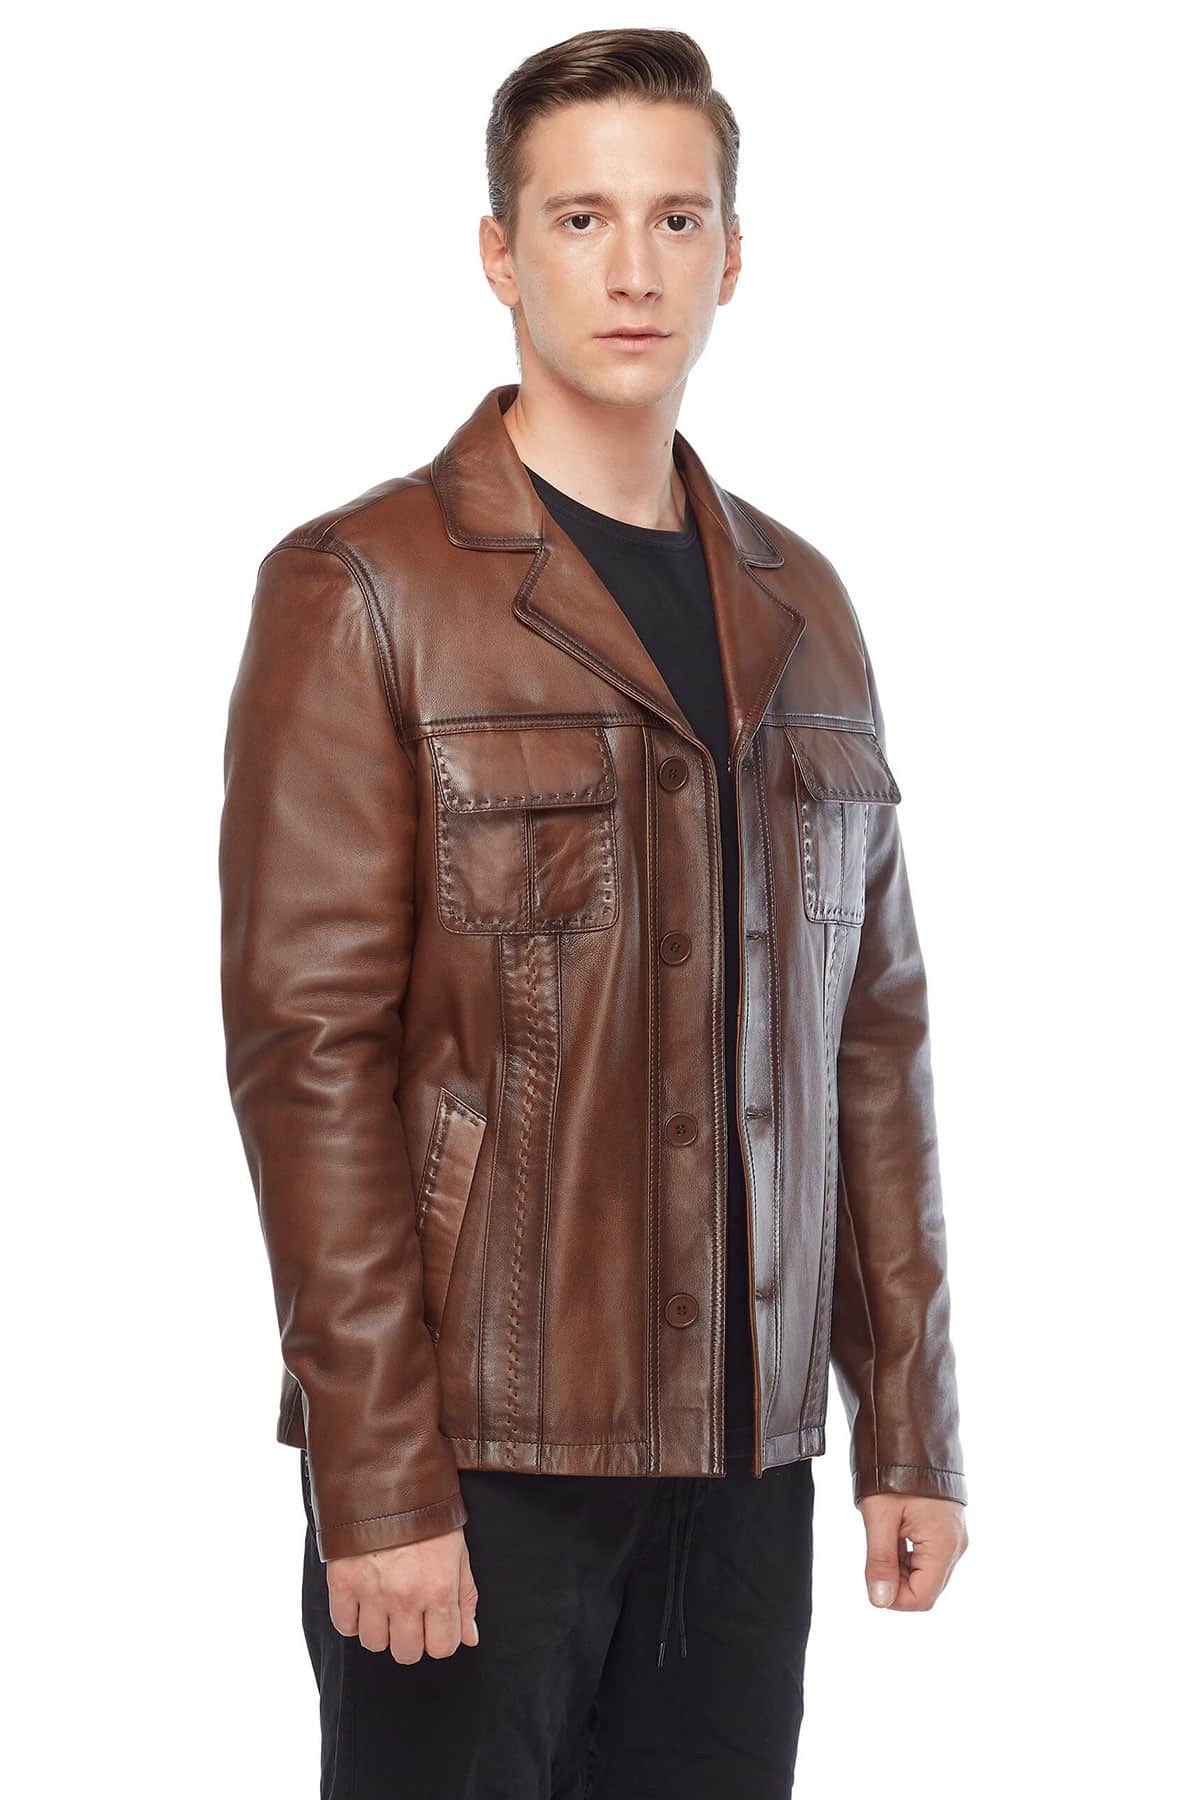 Charley Speed Men's 100 % Real Brown Leather Coat